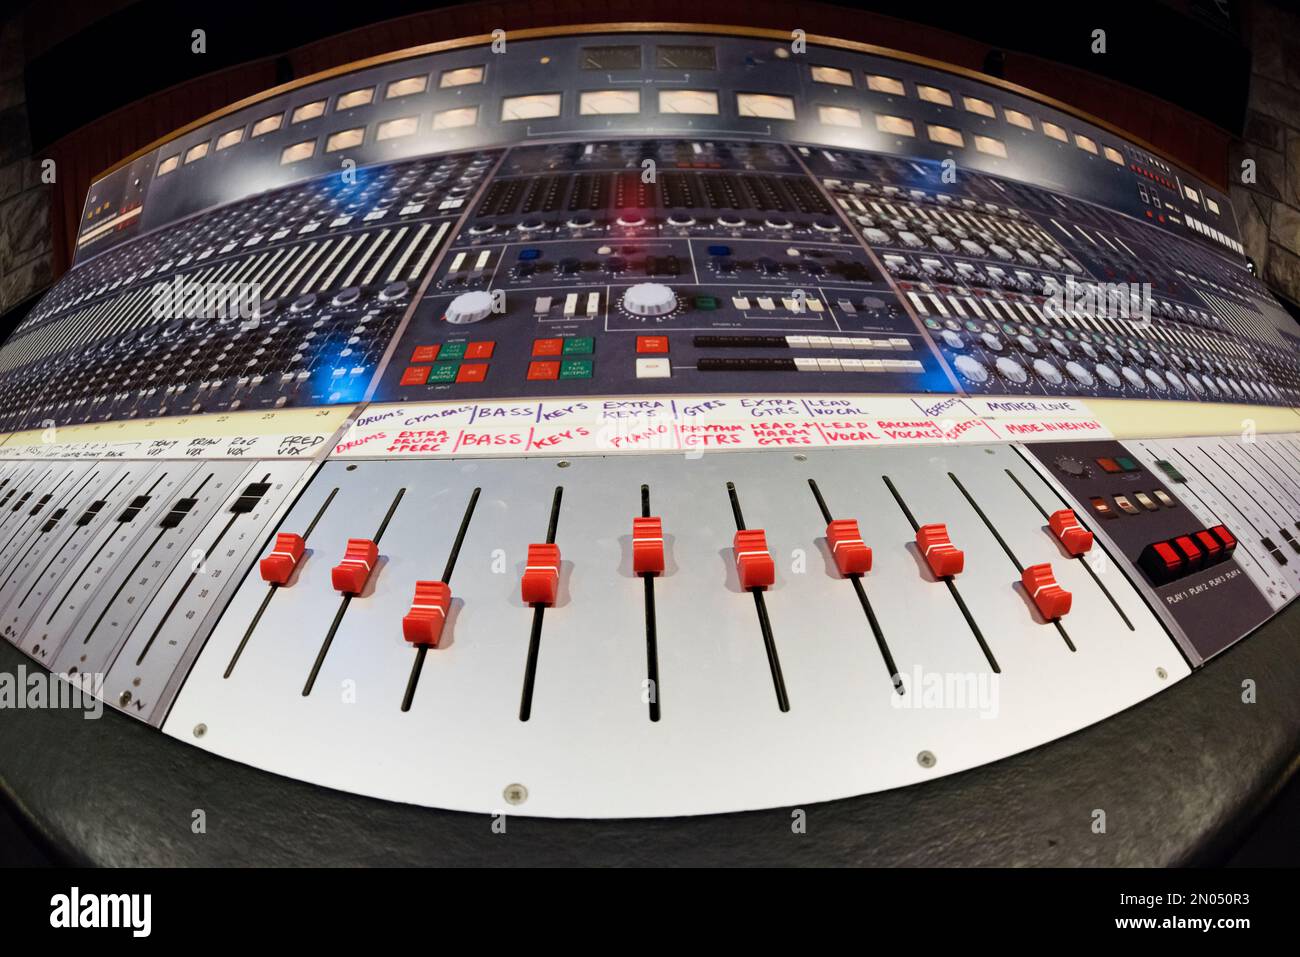 Vintage audio recording equipment in a professional analog recording studio. Picture taken at the Mountain View Studio at Montreux, Switzerland. Stock Photo